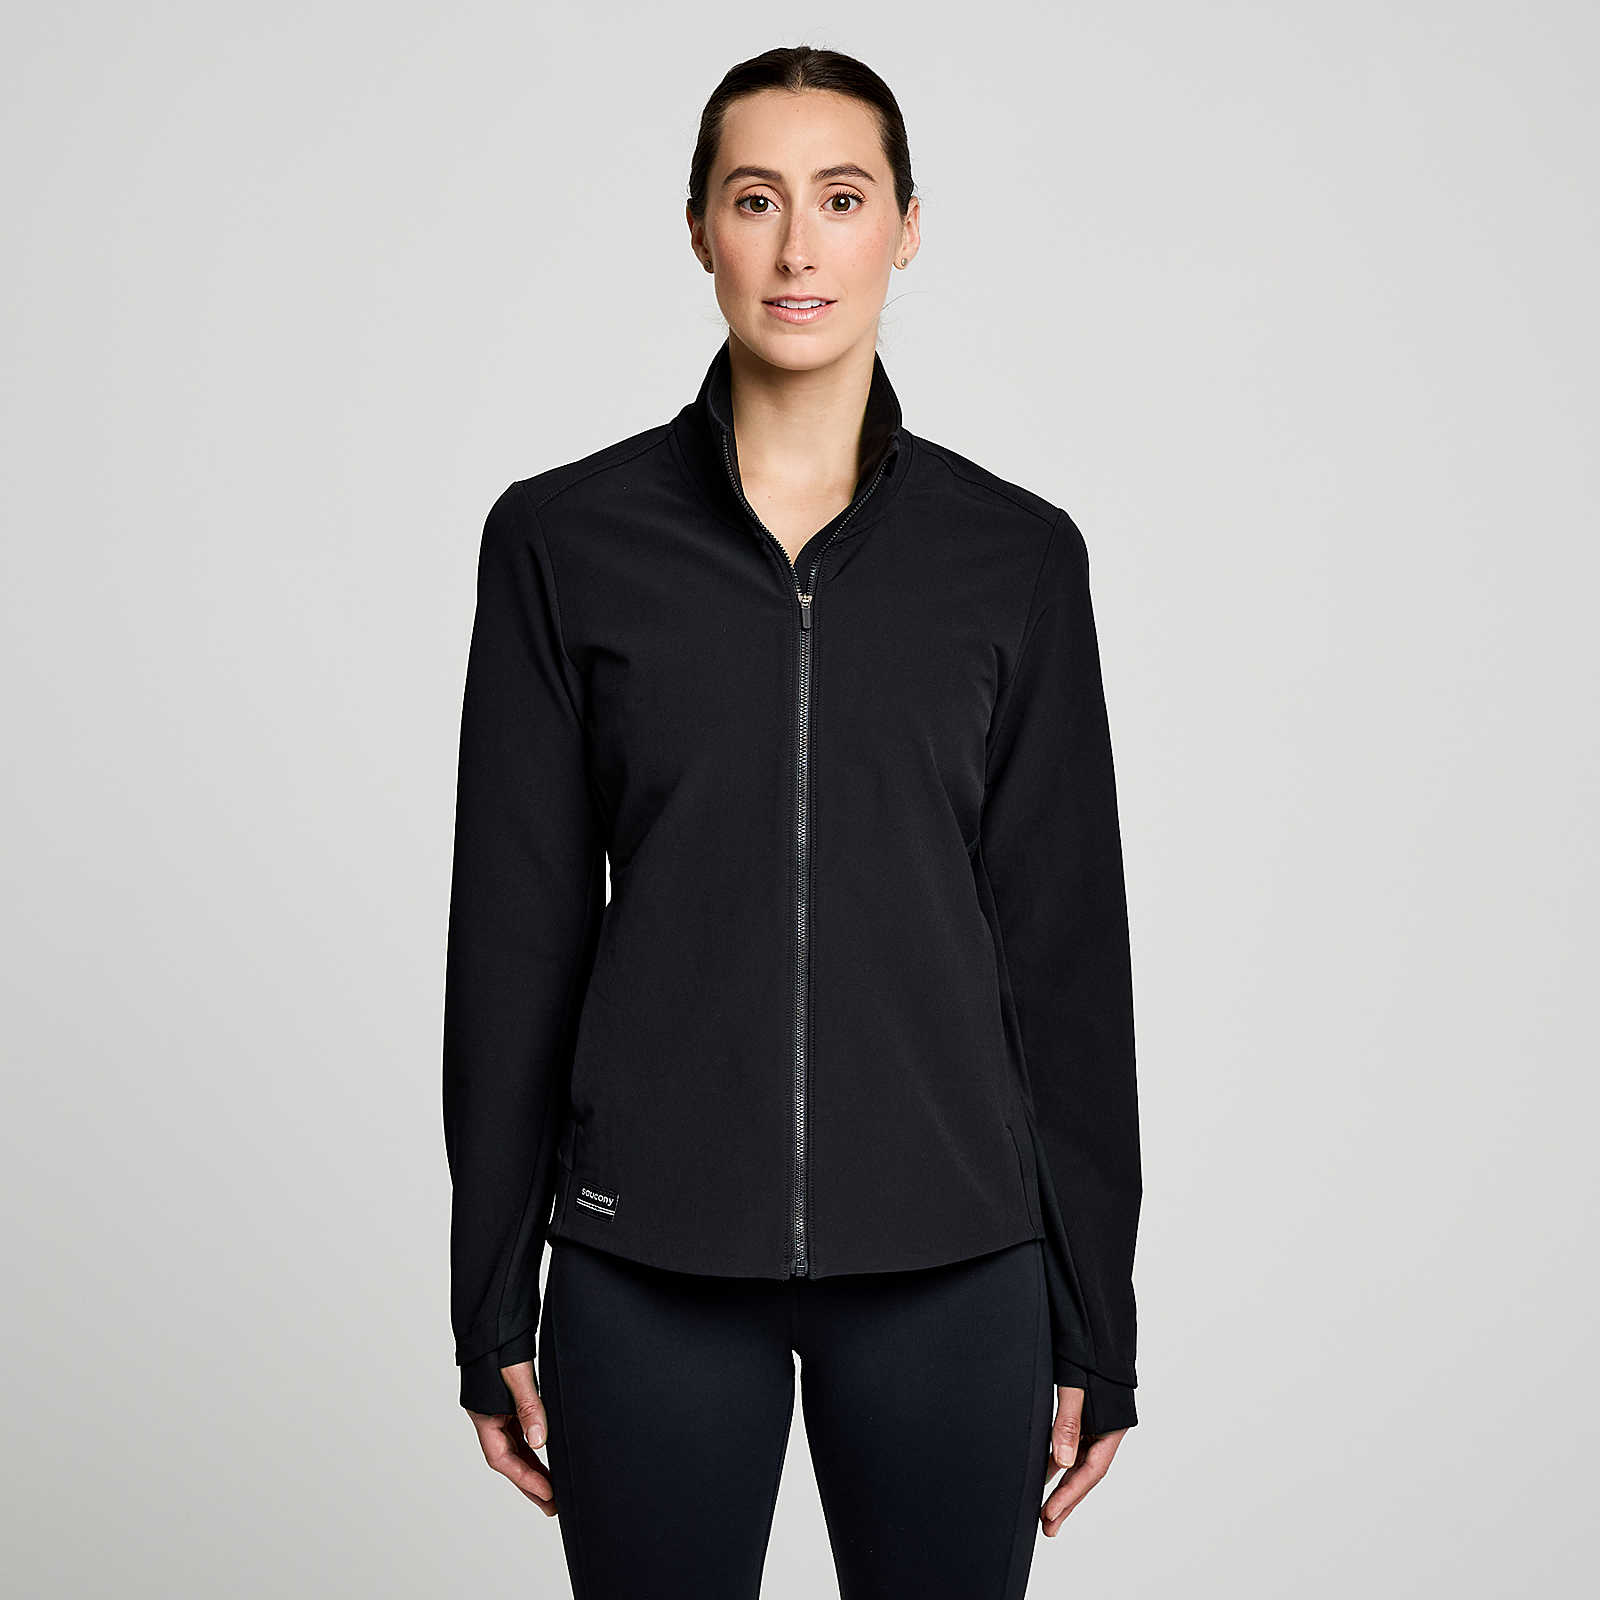 WOMEN\'S TRIUMPH JACKET | Performance Running Outfitters